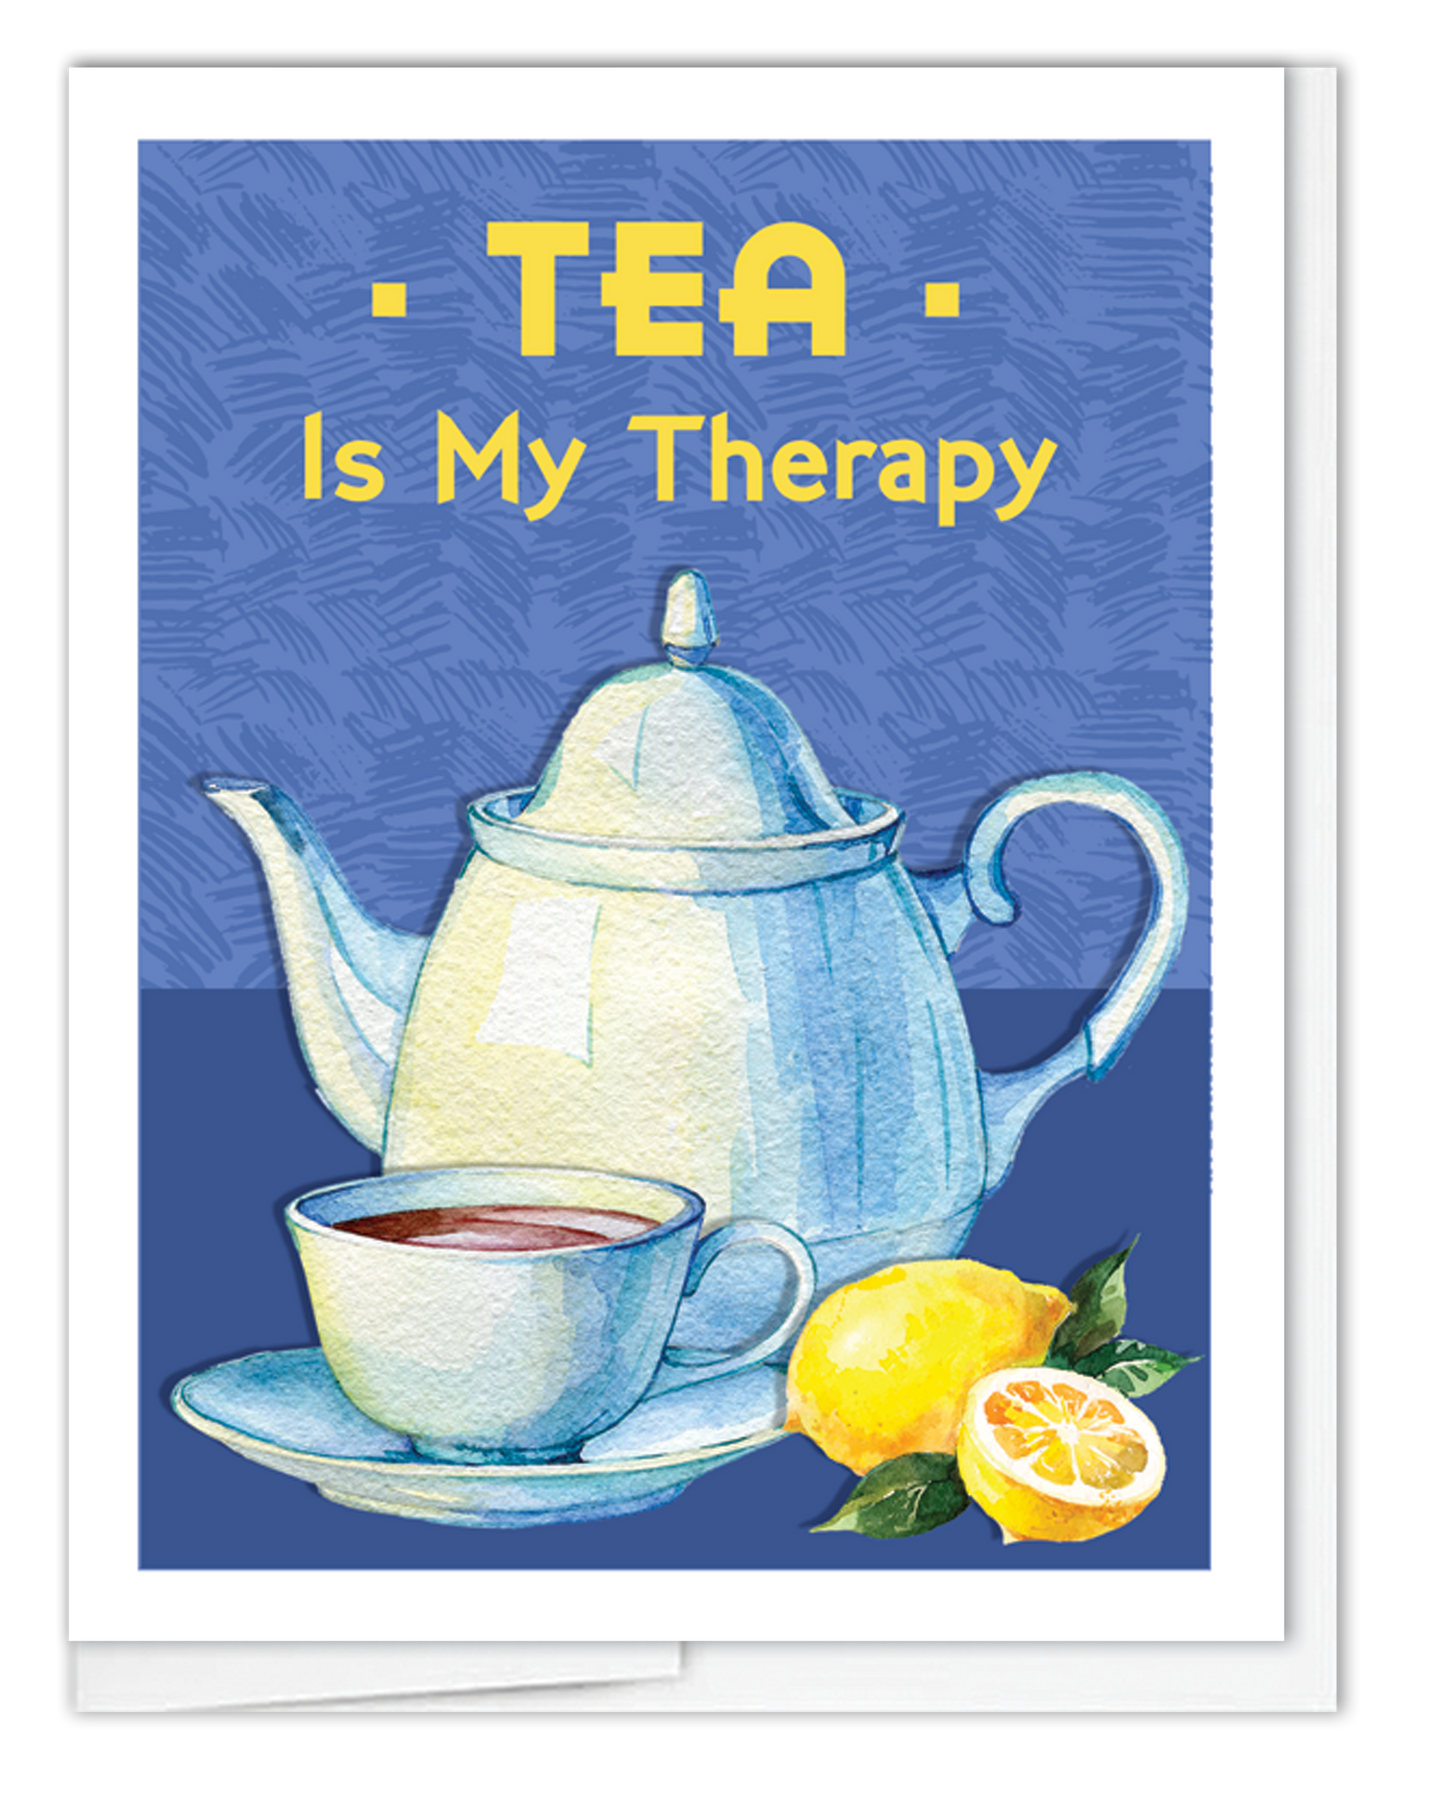 Tea Therapy